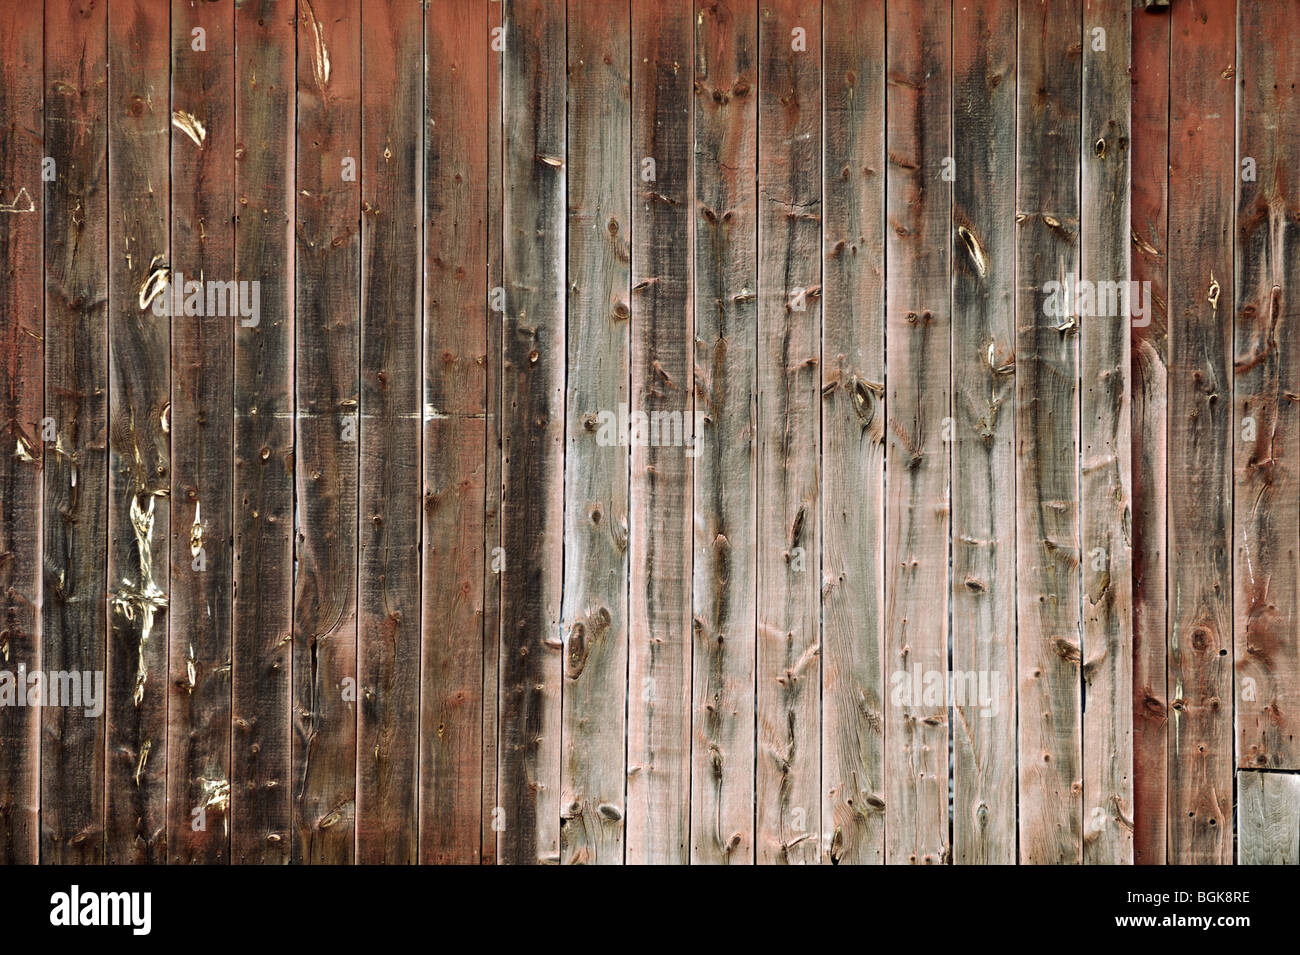 Grungy weathered wooden boards background texture Stock Photo